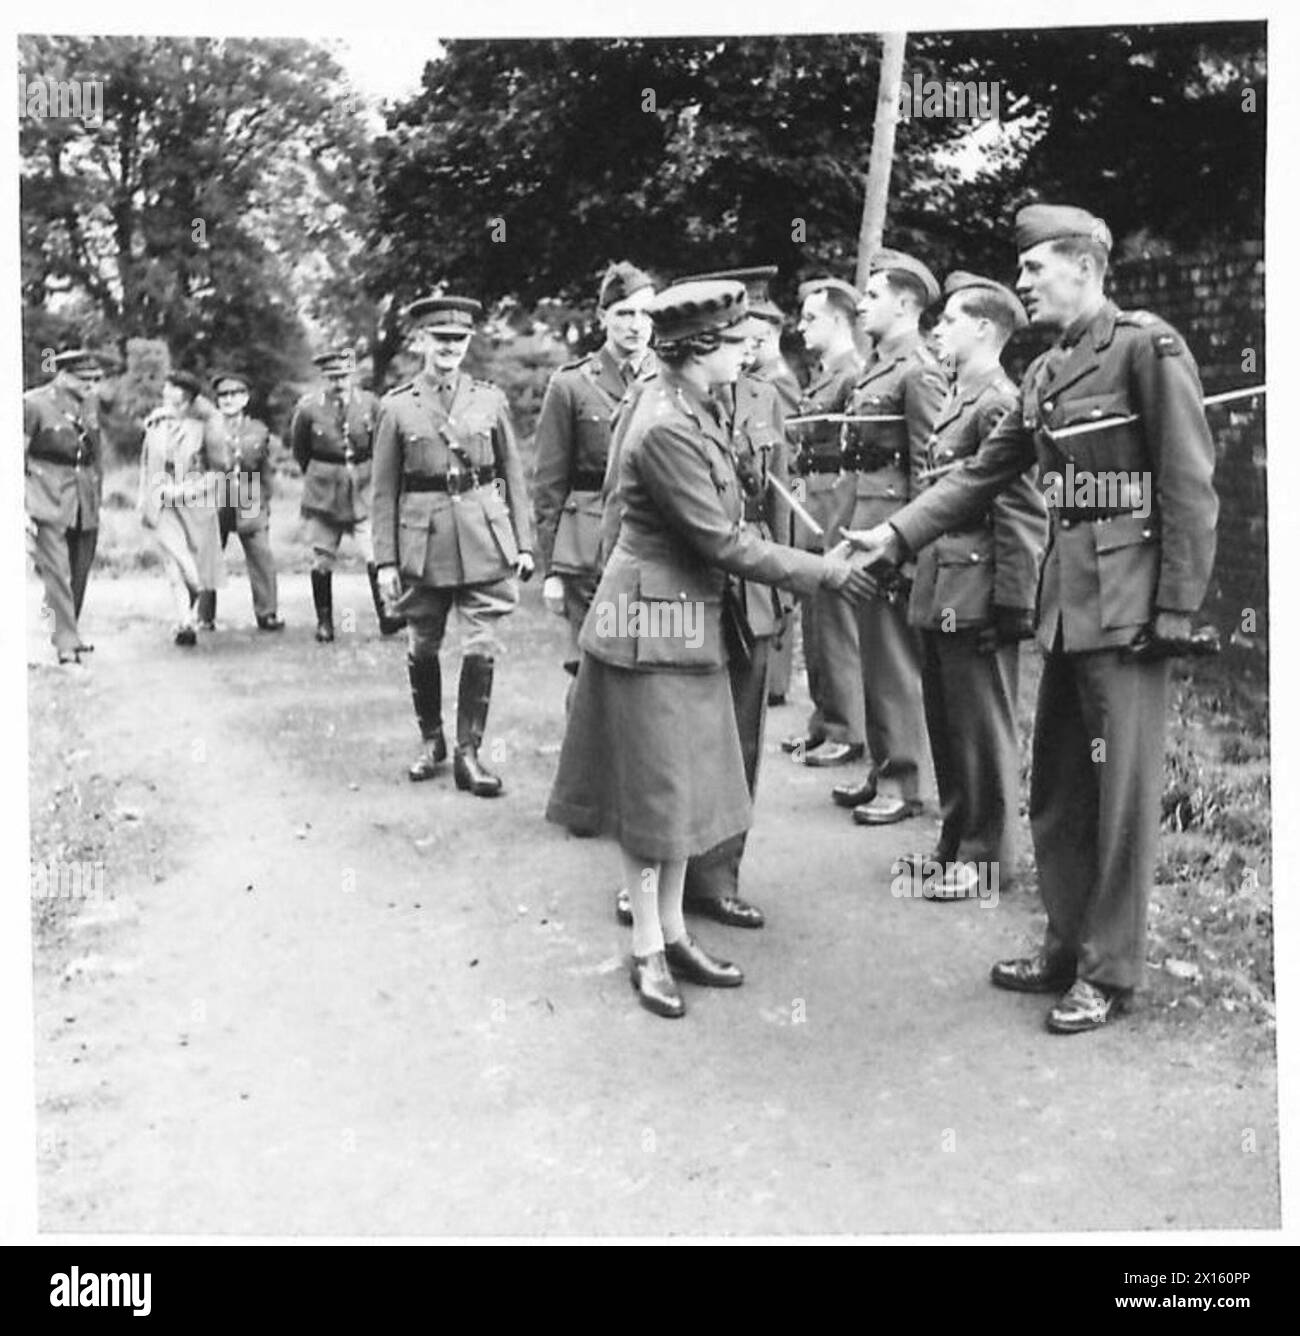 H.R.R. THE PRINCESS ROYAL VISITS NORTHERN IRELAND - H.R.H. is introduced to N.I.D. Signals officers by the Lt.Col. E.H. Cogan-Harris (Chief Signals Officer,NID) British Army Stock Photo